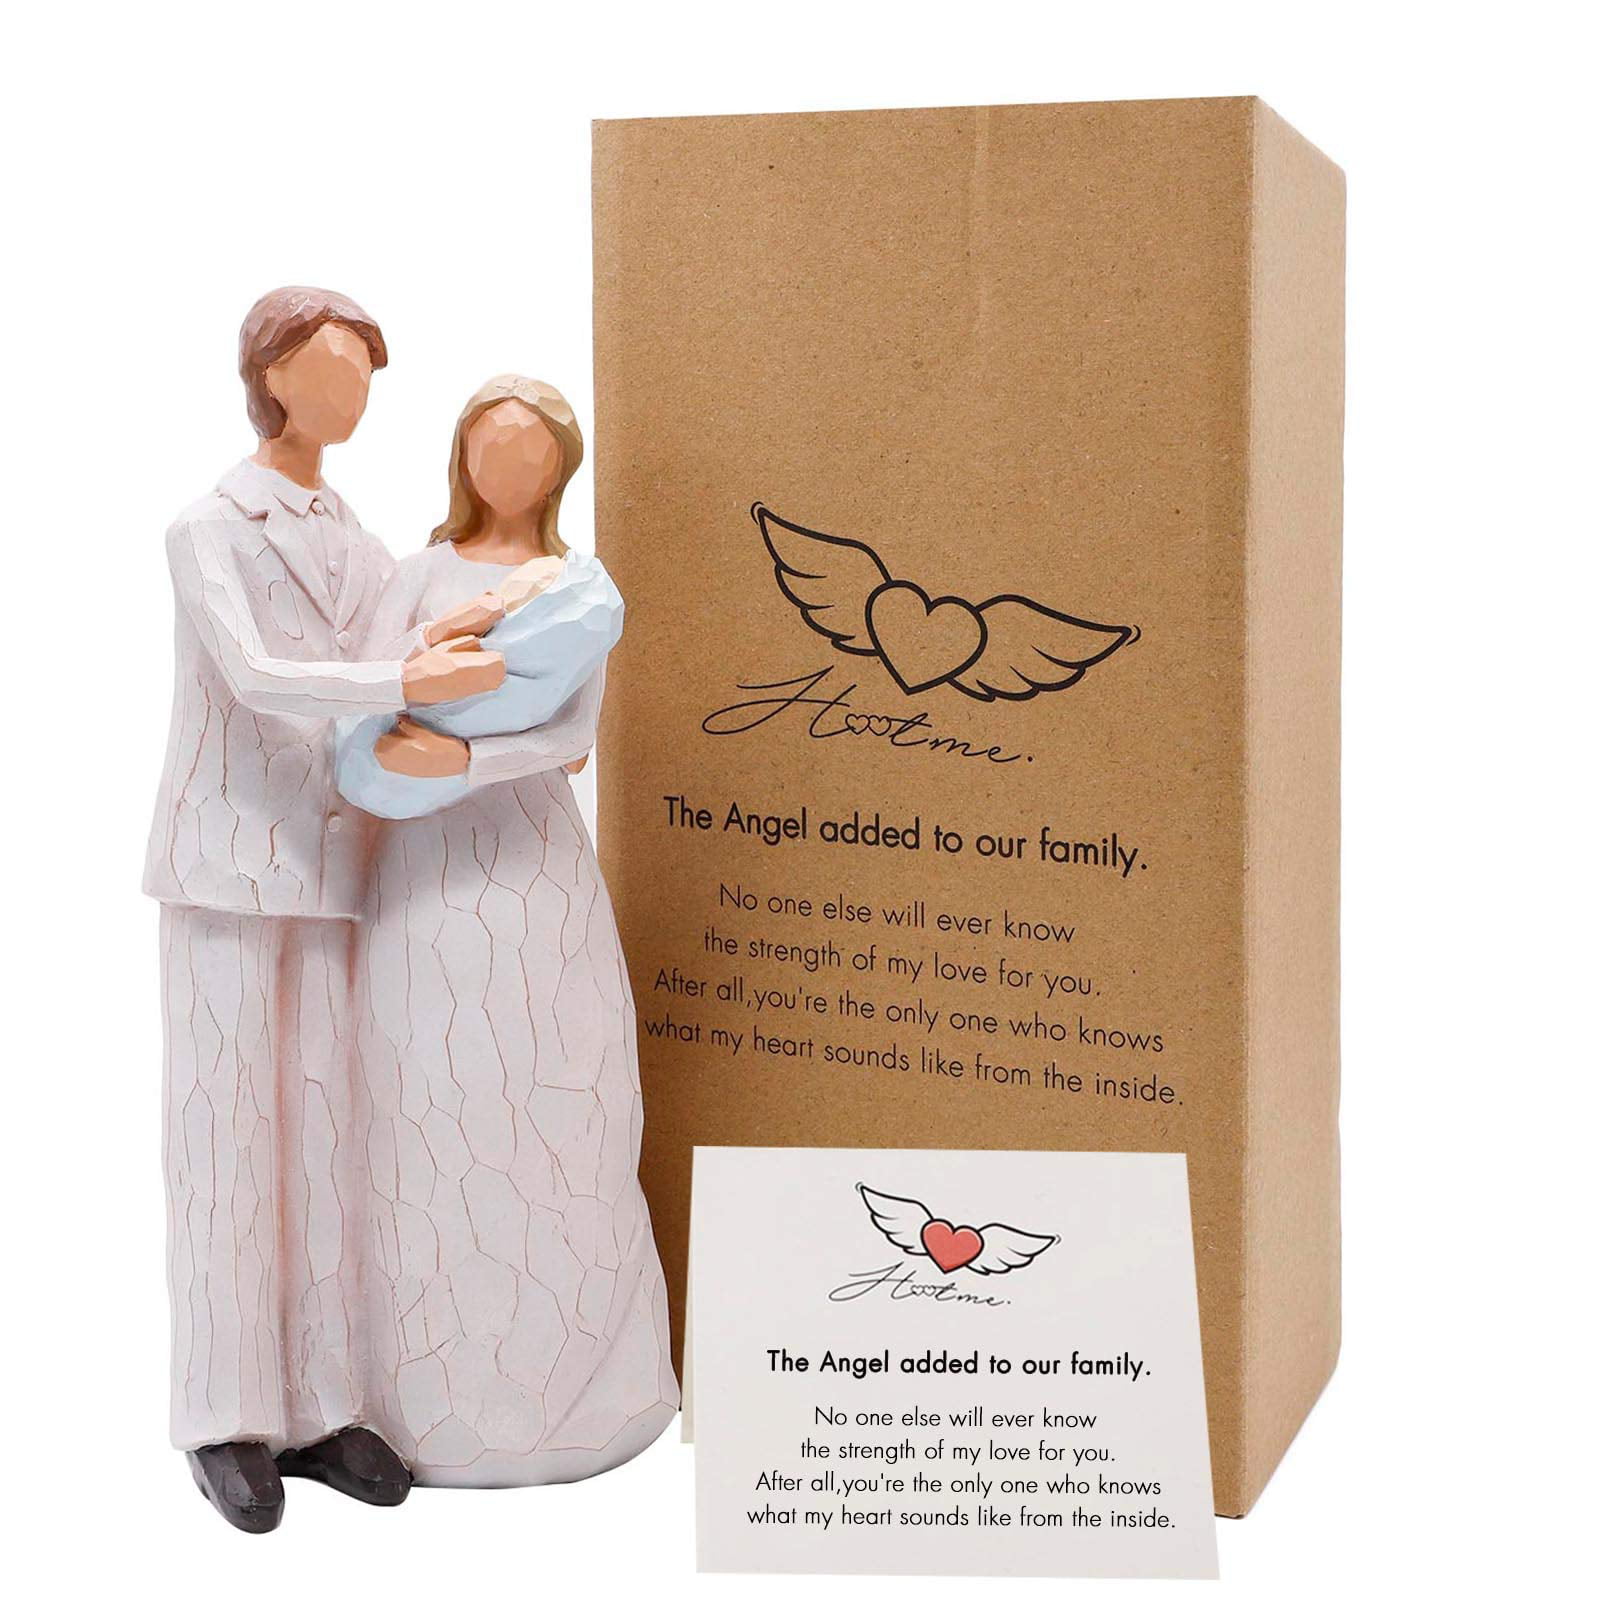 The Greatest Bond Mon and Child Sculptures Sculpted Hand-Painted Figures with Gift Card for Anniversary Birthday Mother and Son Figurines Statues Multicolor